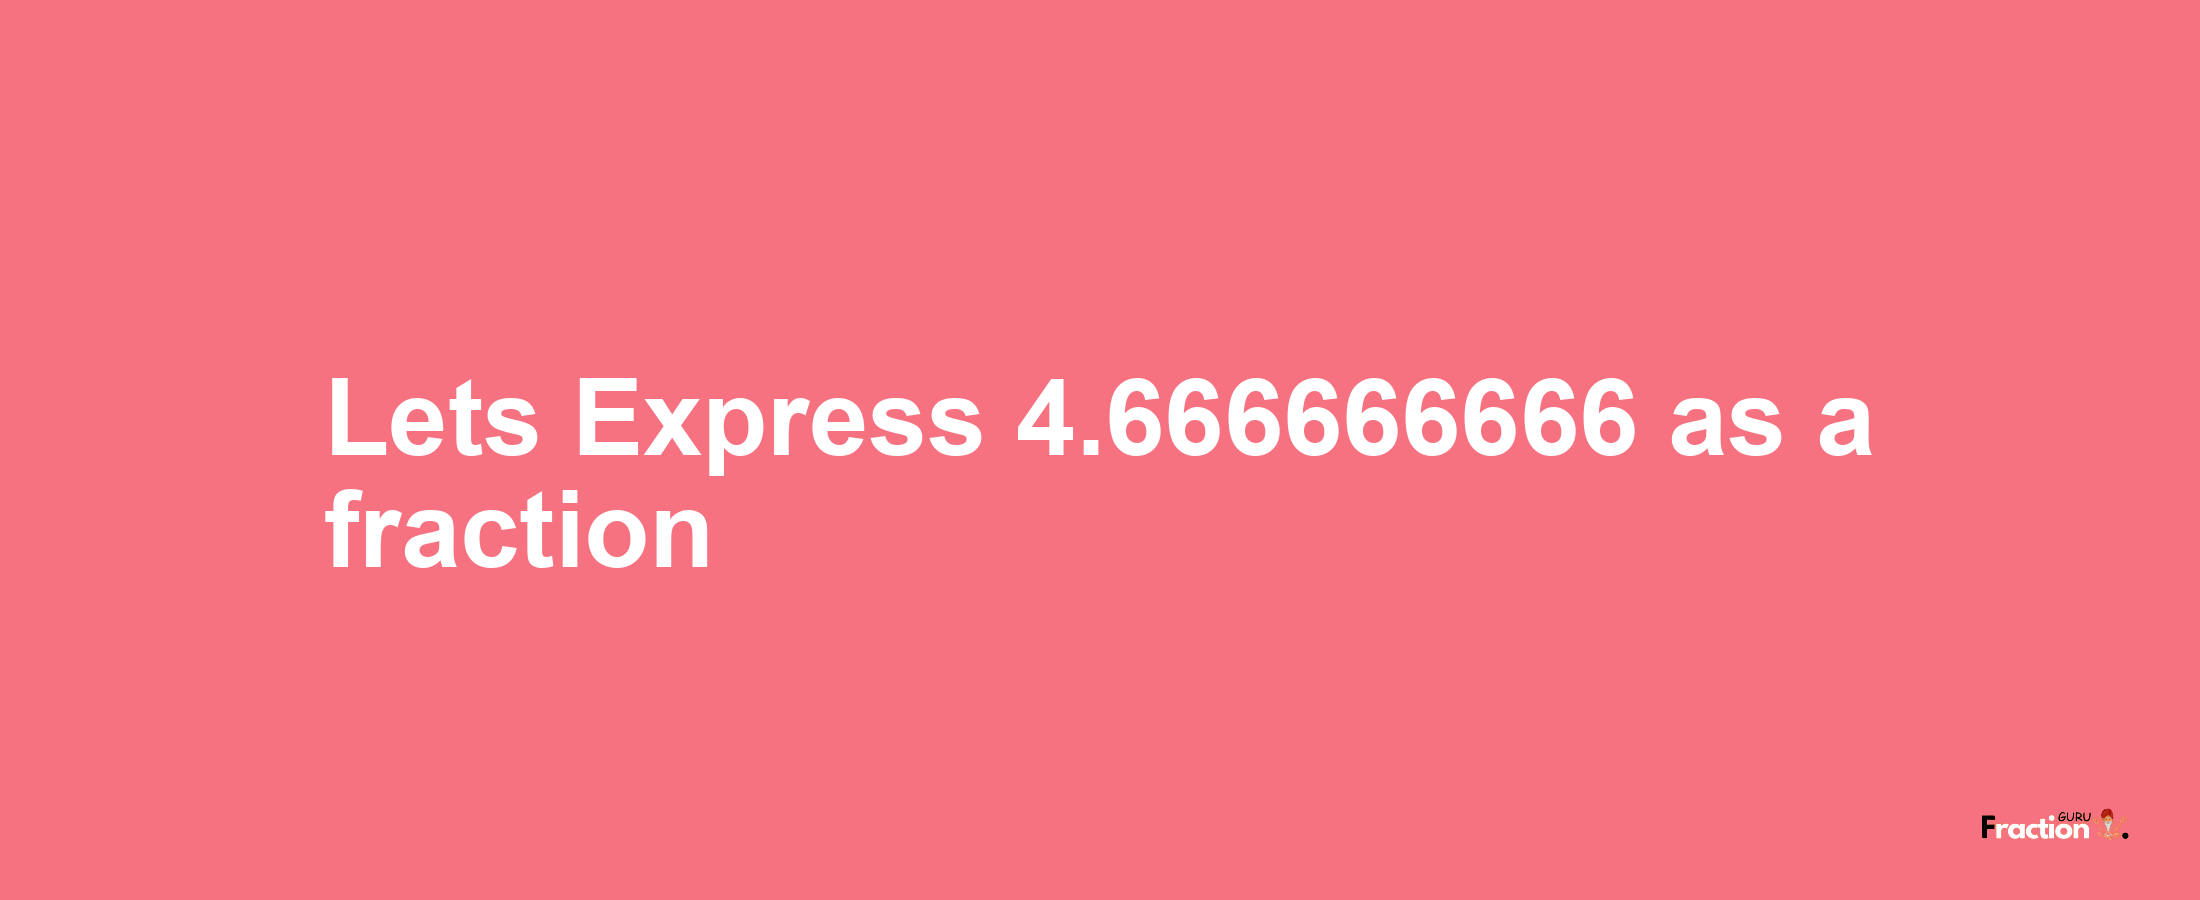 Lets Express 4.666666666 as afraction